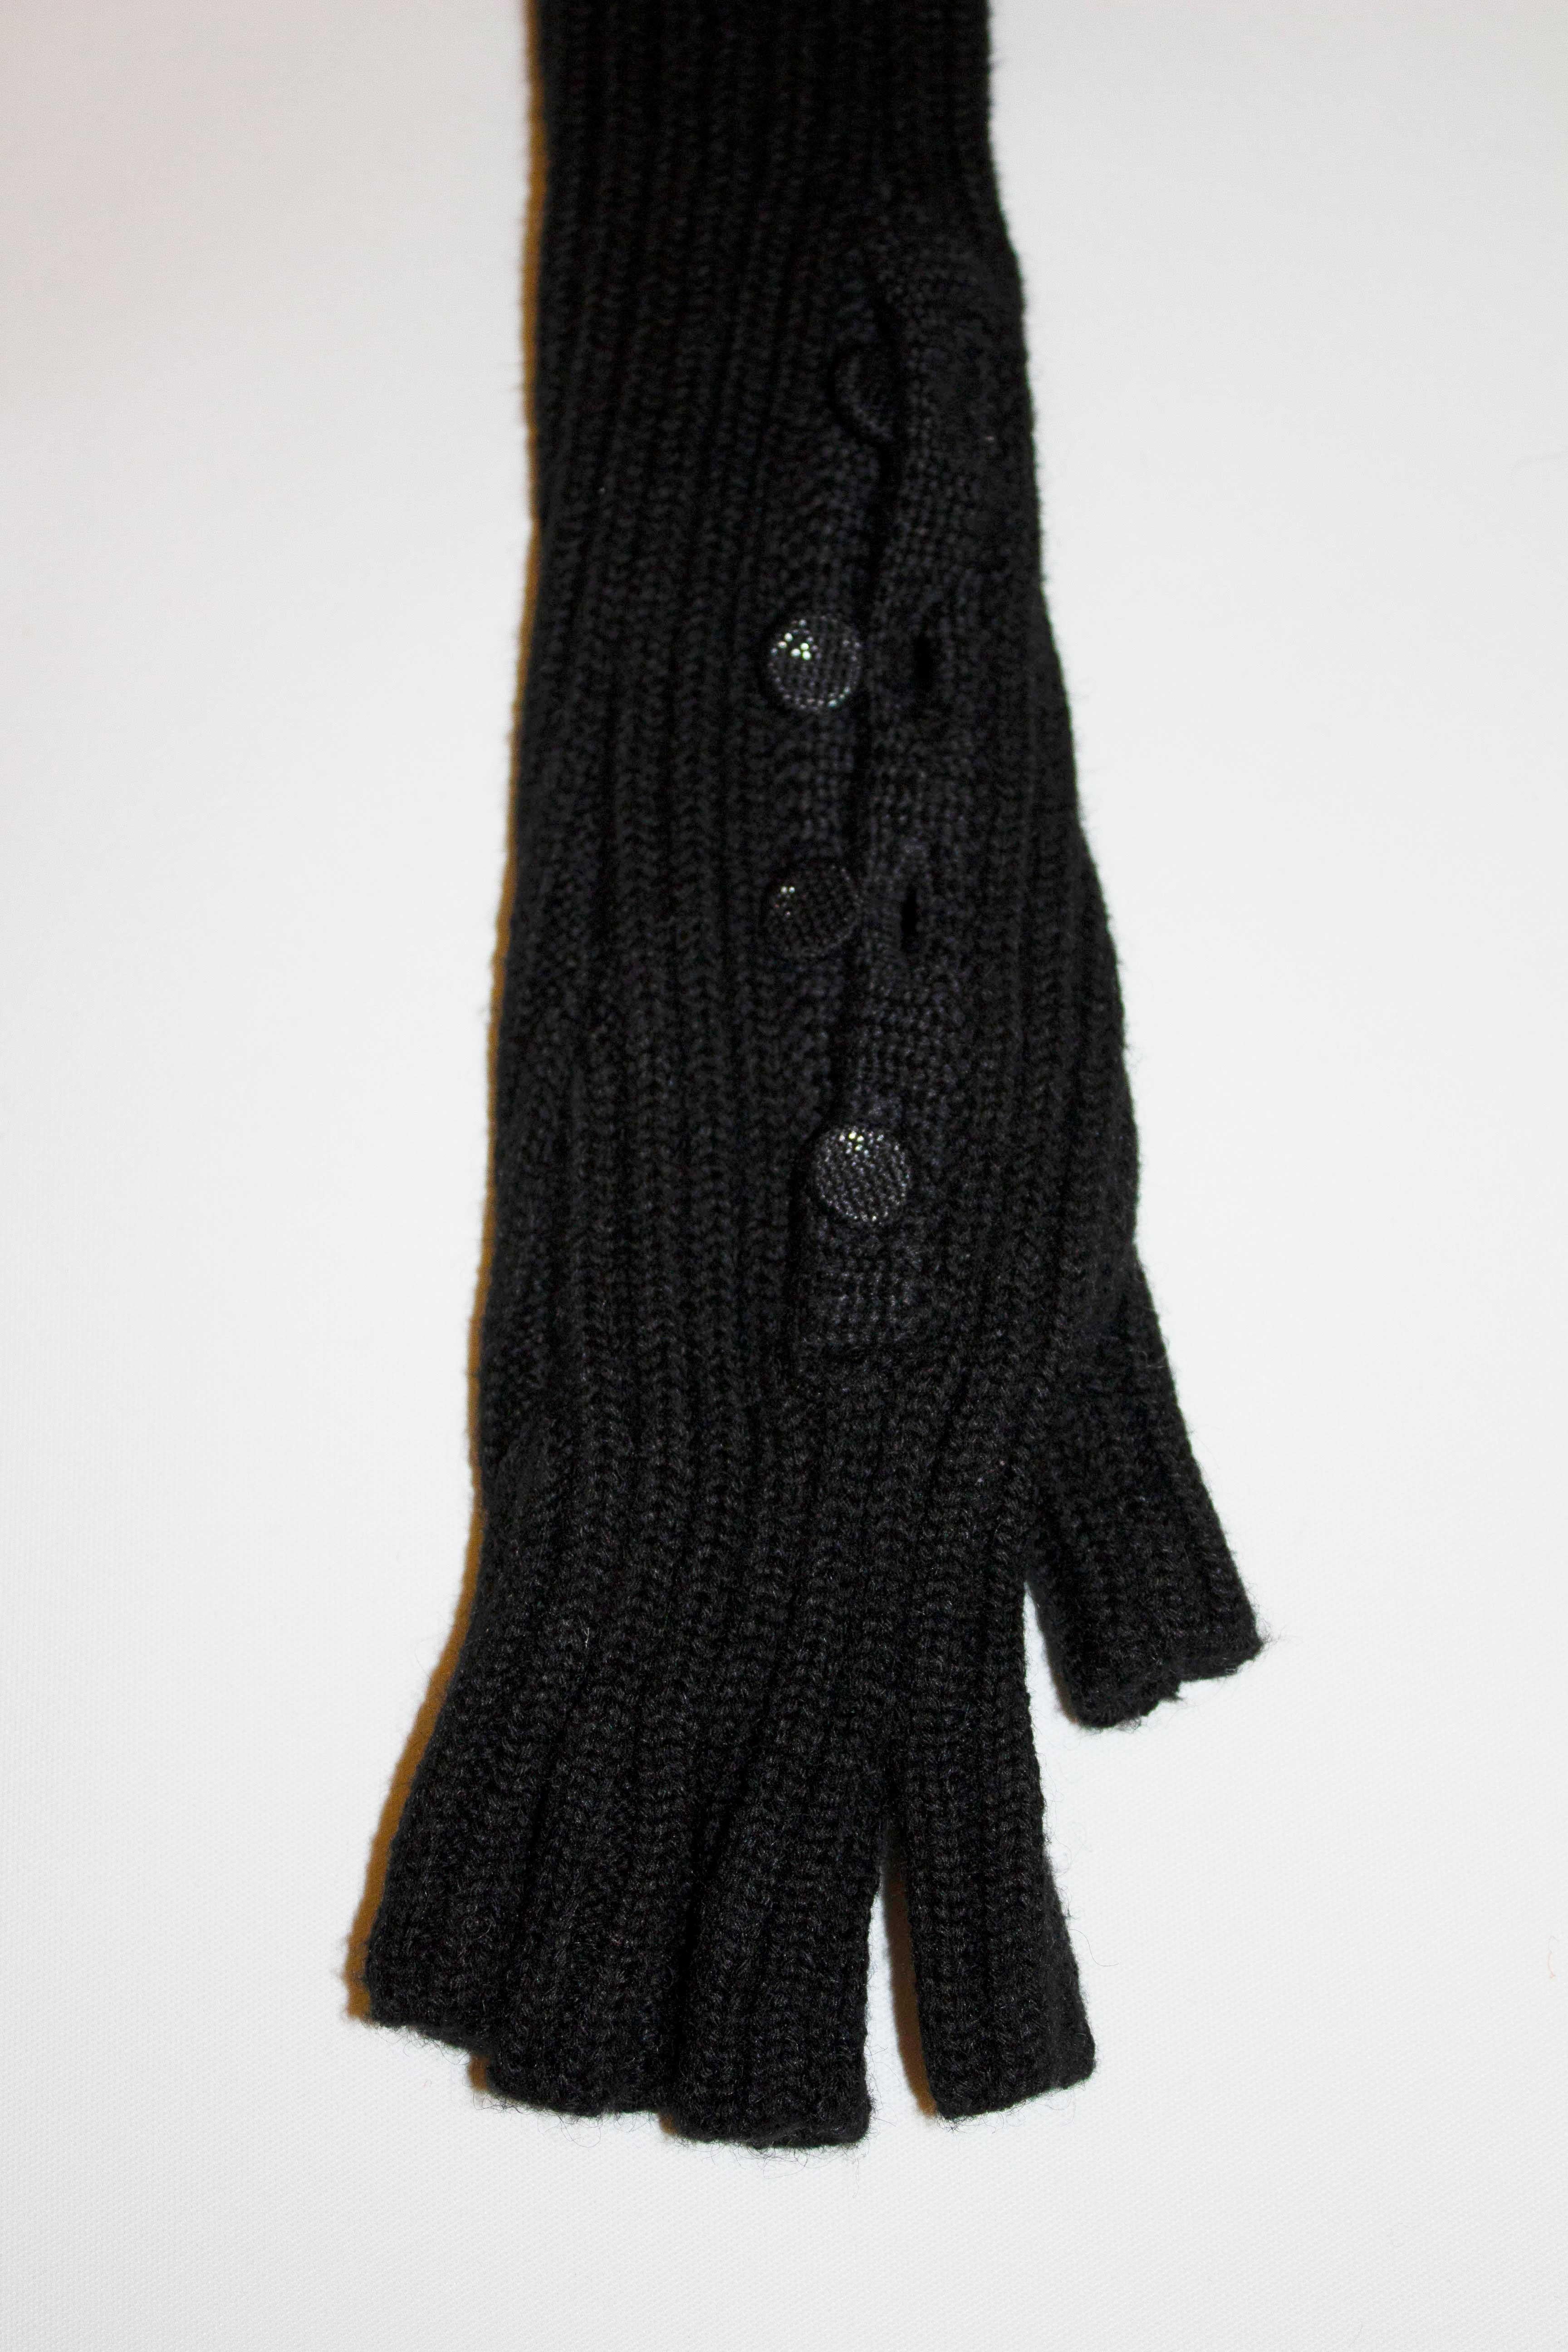 Hankerchief Knitted Tail Coat inlcuding Fingerless Gloves For Sale 2